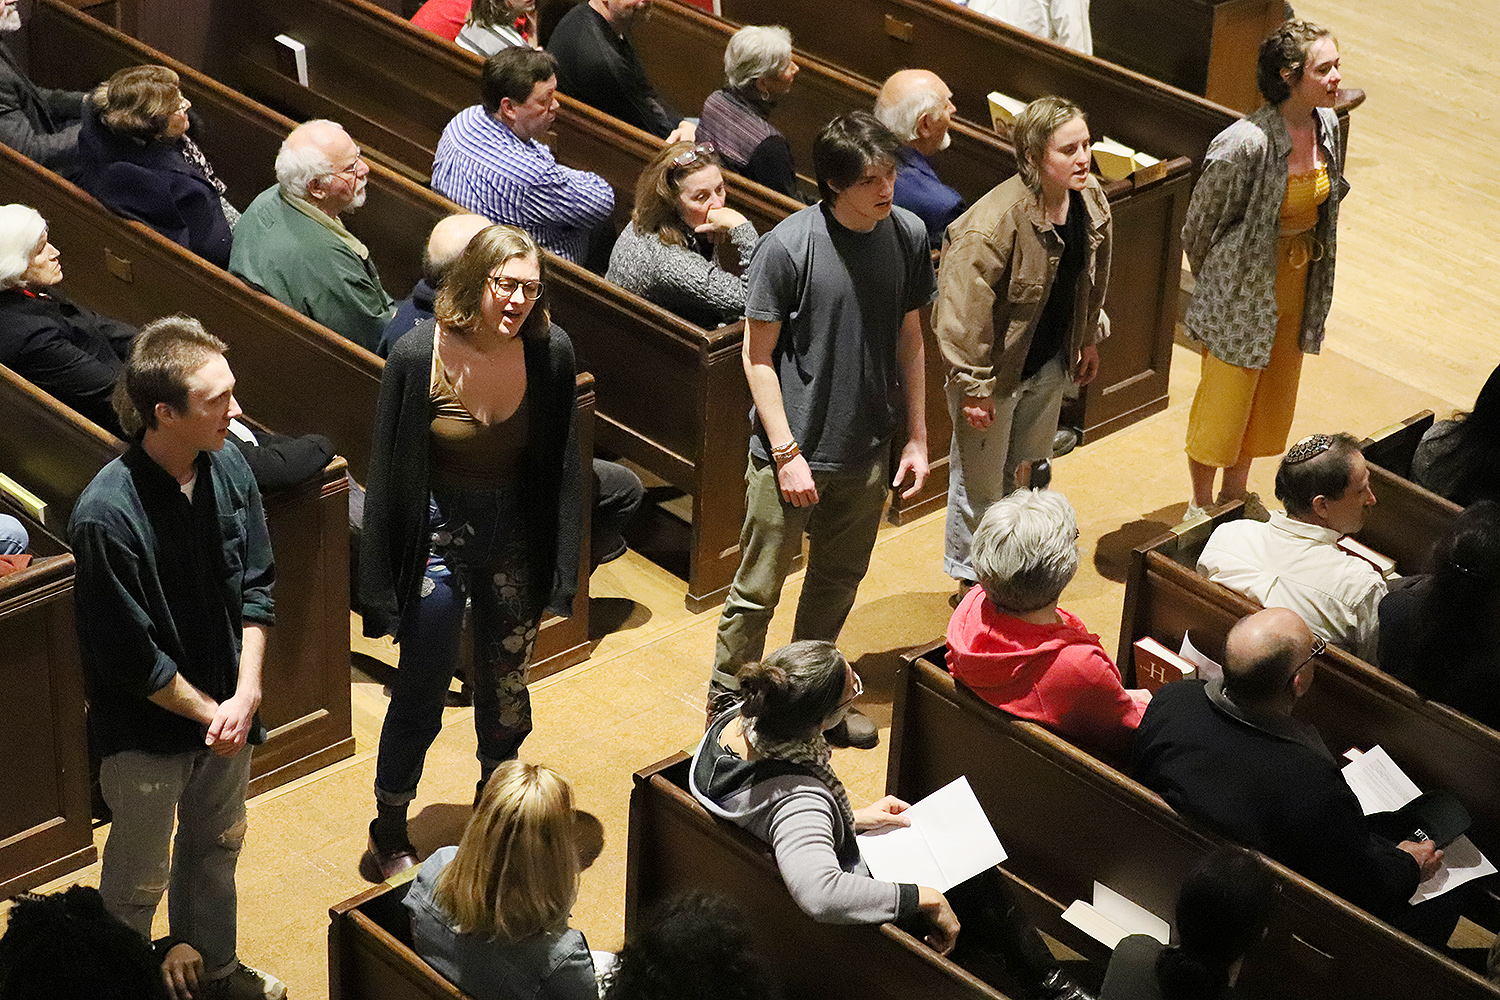 The panel discussion was followed by a ticketed concert featuring the premiere performance of "This Side of the Curtain.” The multimedia work was performed by more than 40 musicians and dancers from Wesleyan and the surrounding community, directed by Katja Kolcio.